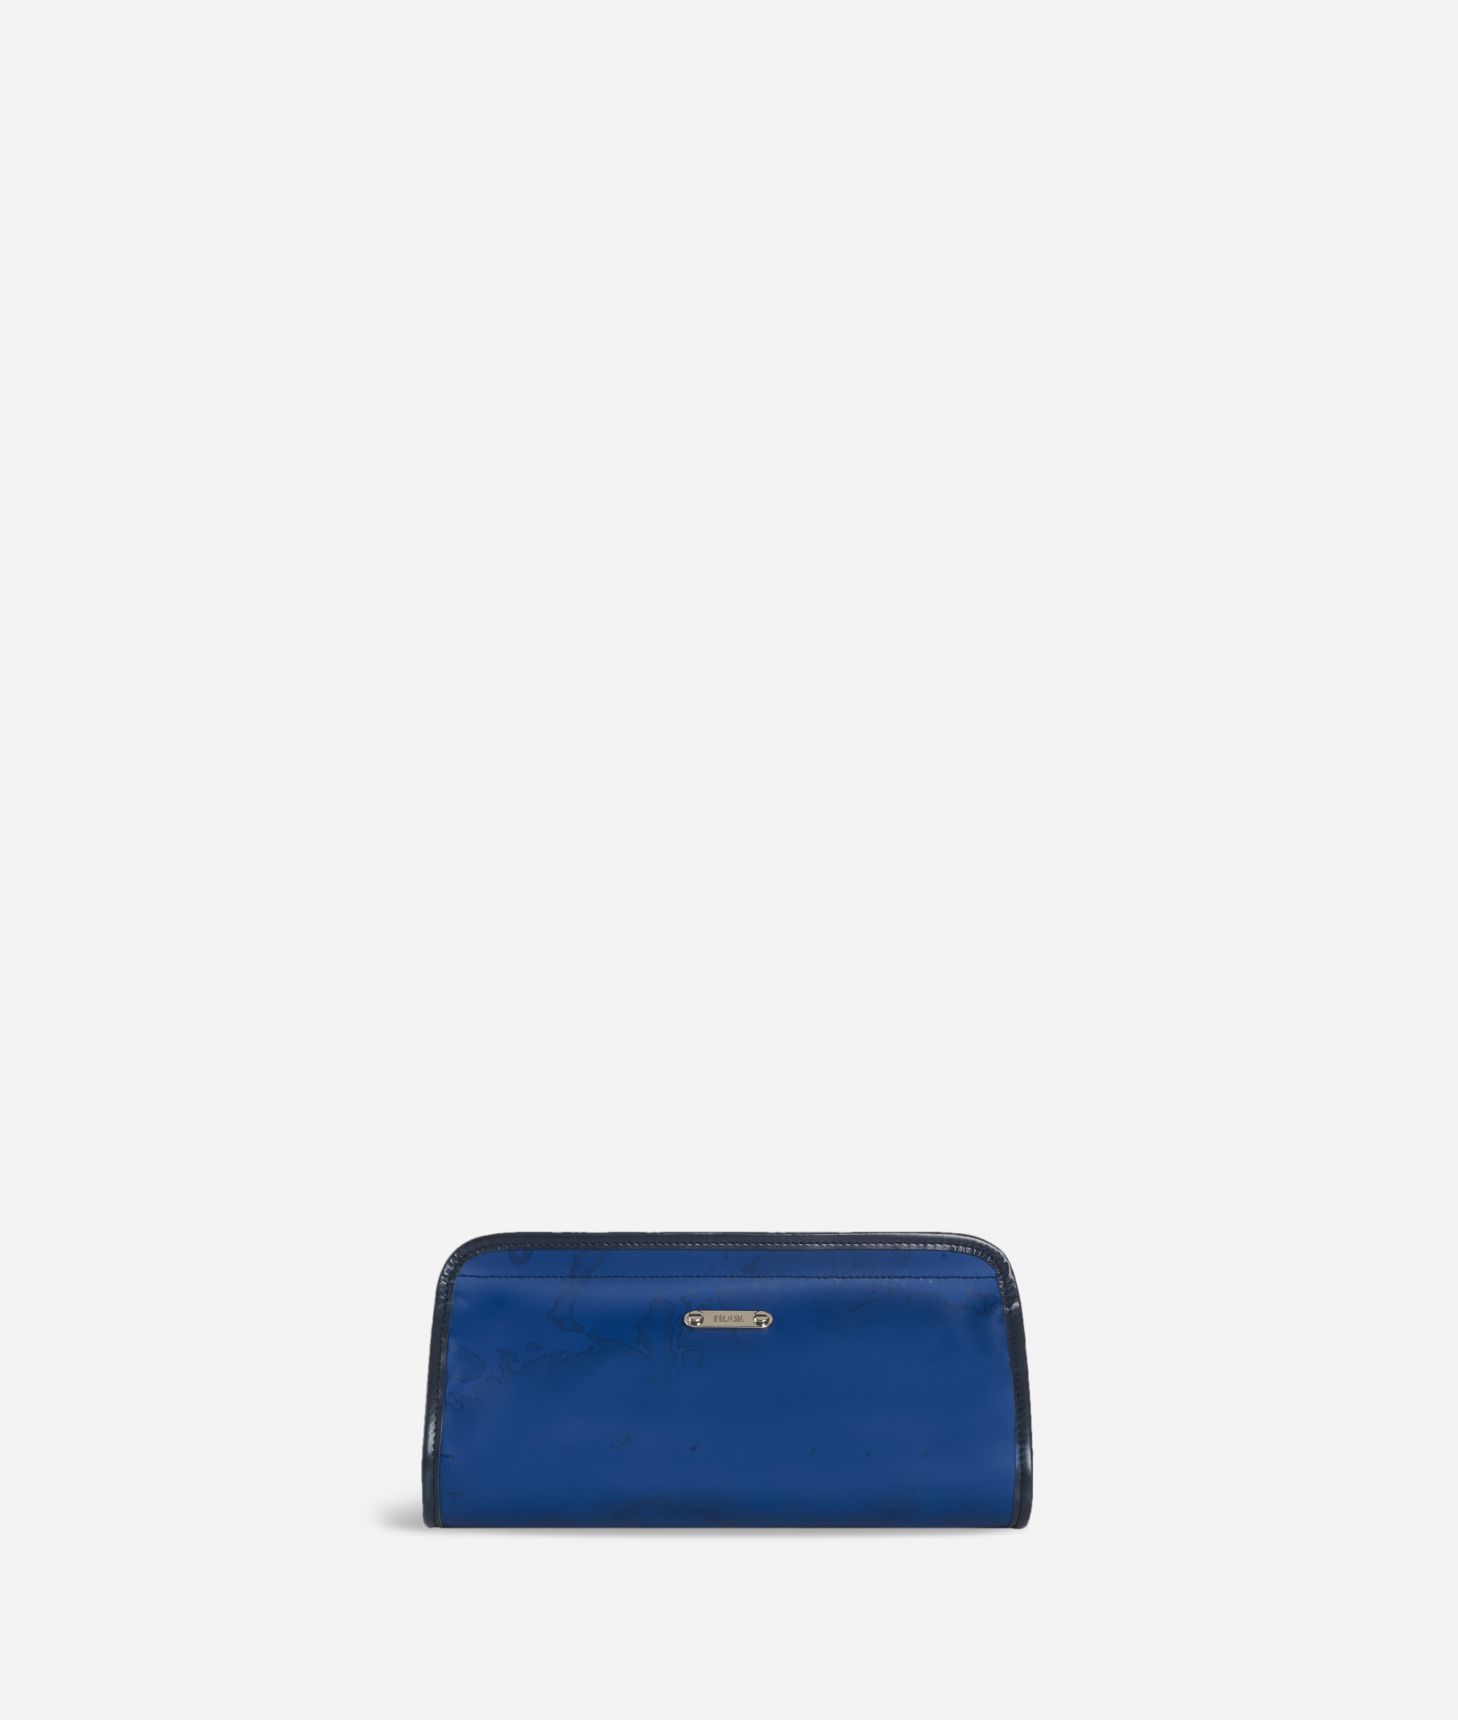 Beauty case with velcro strap in blue Geo fabric,front